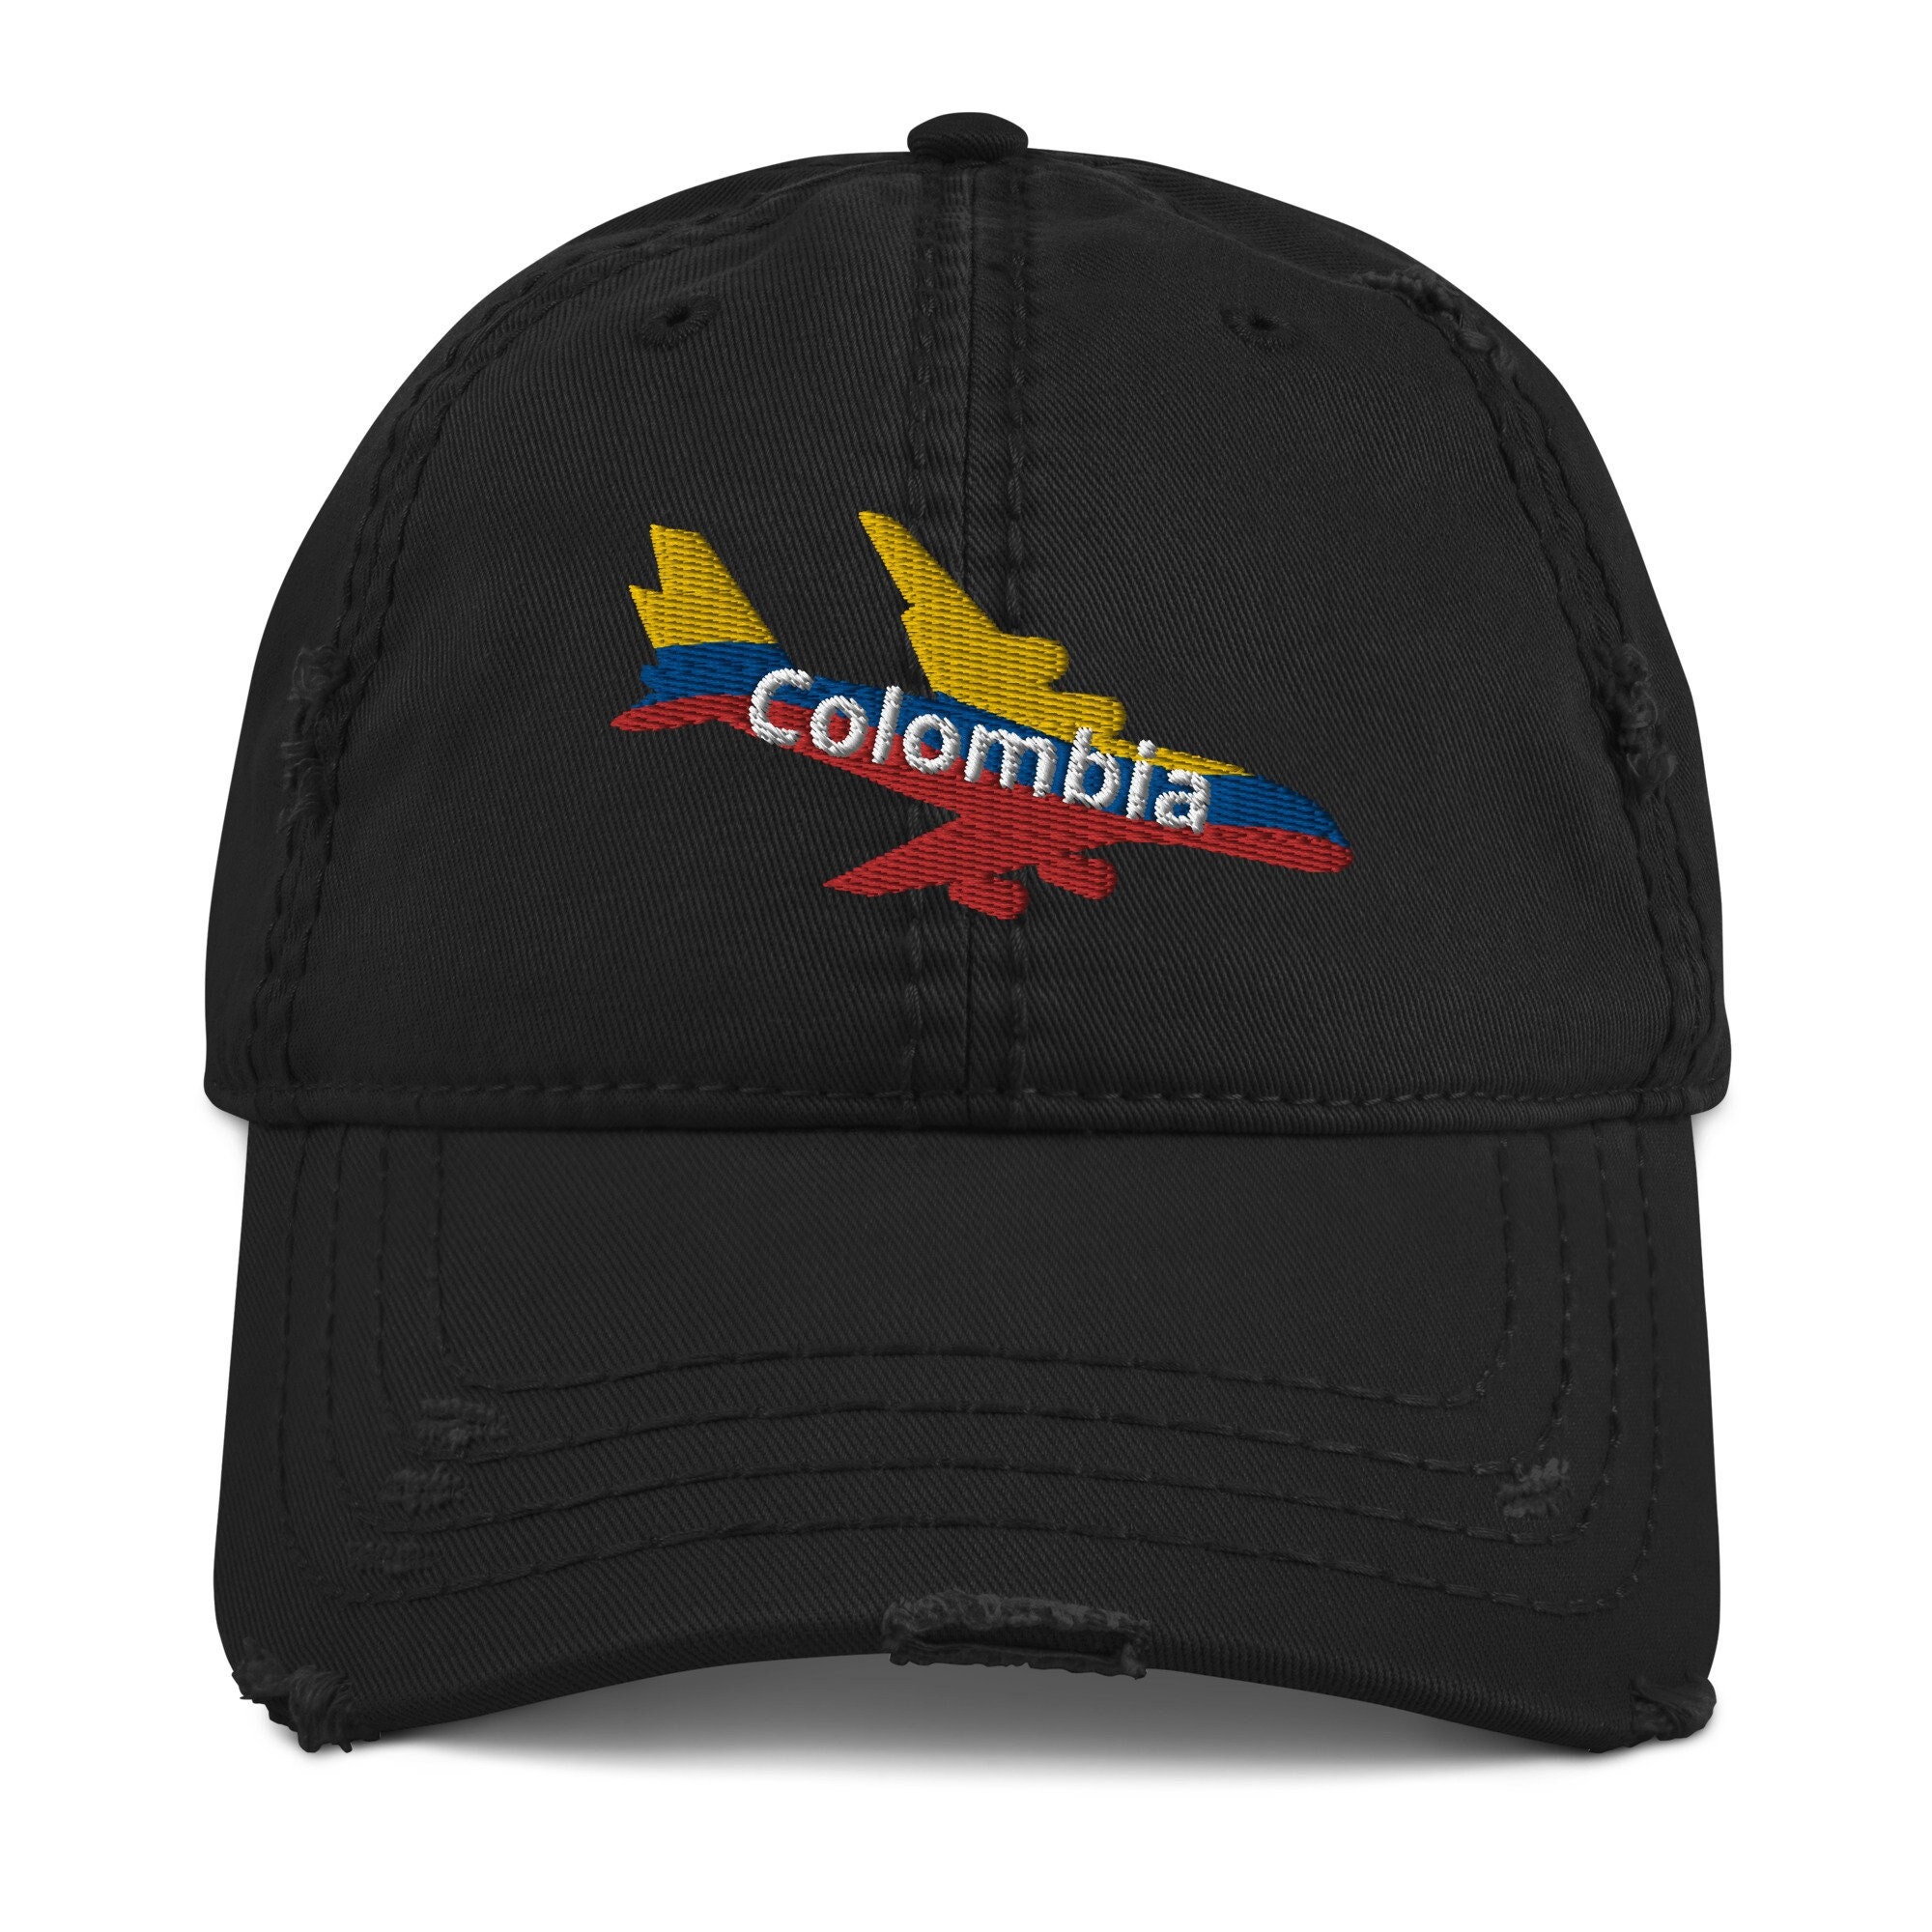 Colombia Hat, Colombian Flag Color Hat, Colombia Airplane Hat, Colombian  Pride, Colombia Gift Hat, Colombia Souvenir Hat, Distressed Hat -   Canada